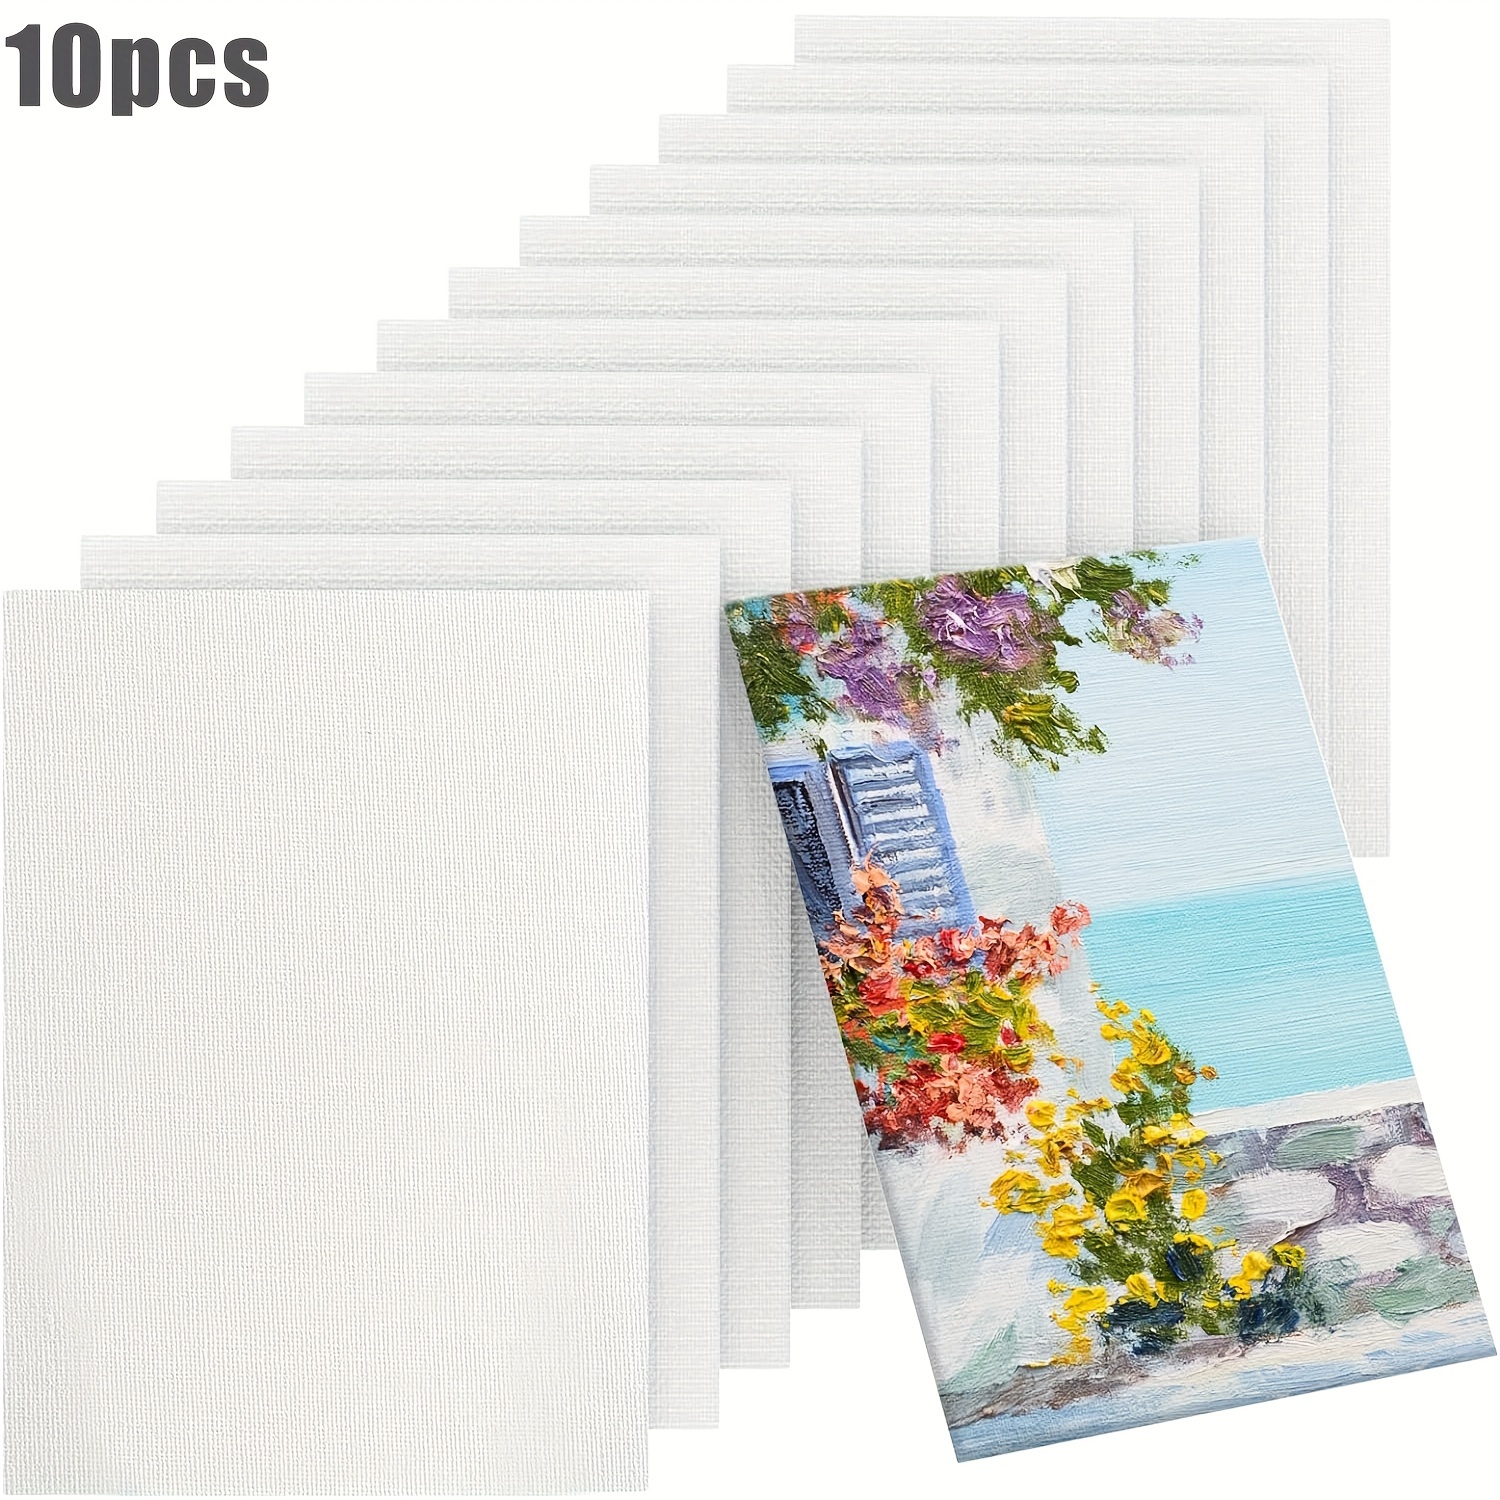 

10pcs 5x7 Inch Canvases For Painting, Acid-free 100% Cotton Canvas Panels,blank Flat Canvas Board For Acrylics Oil Watercolor Paints